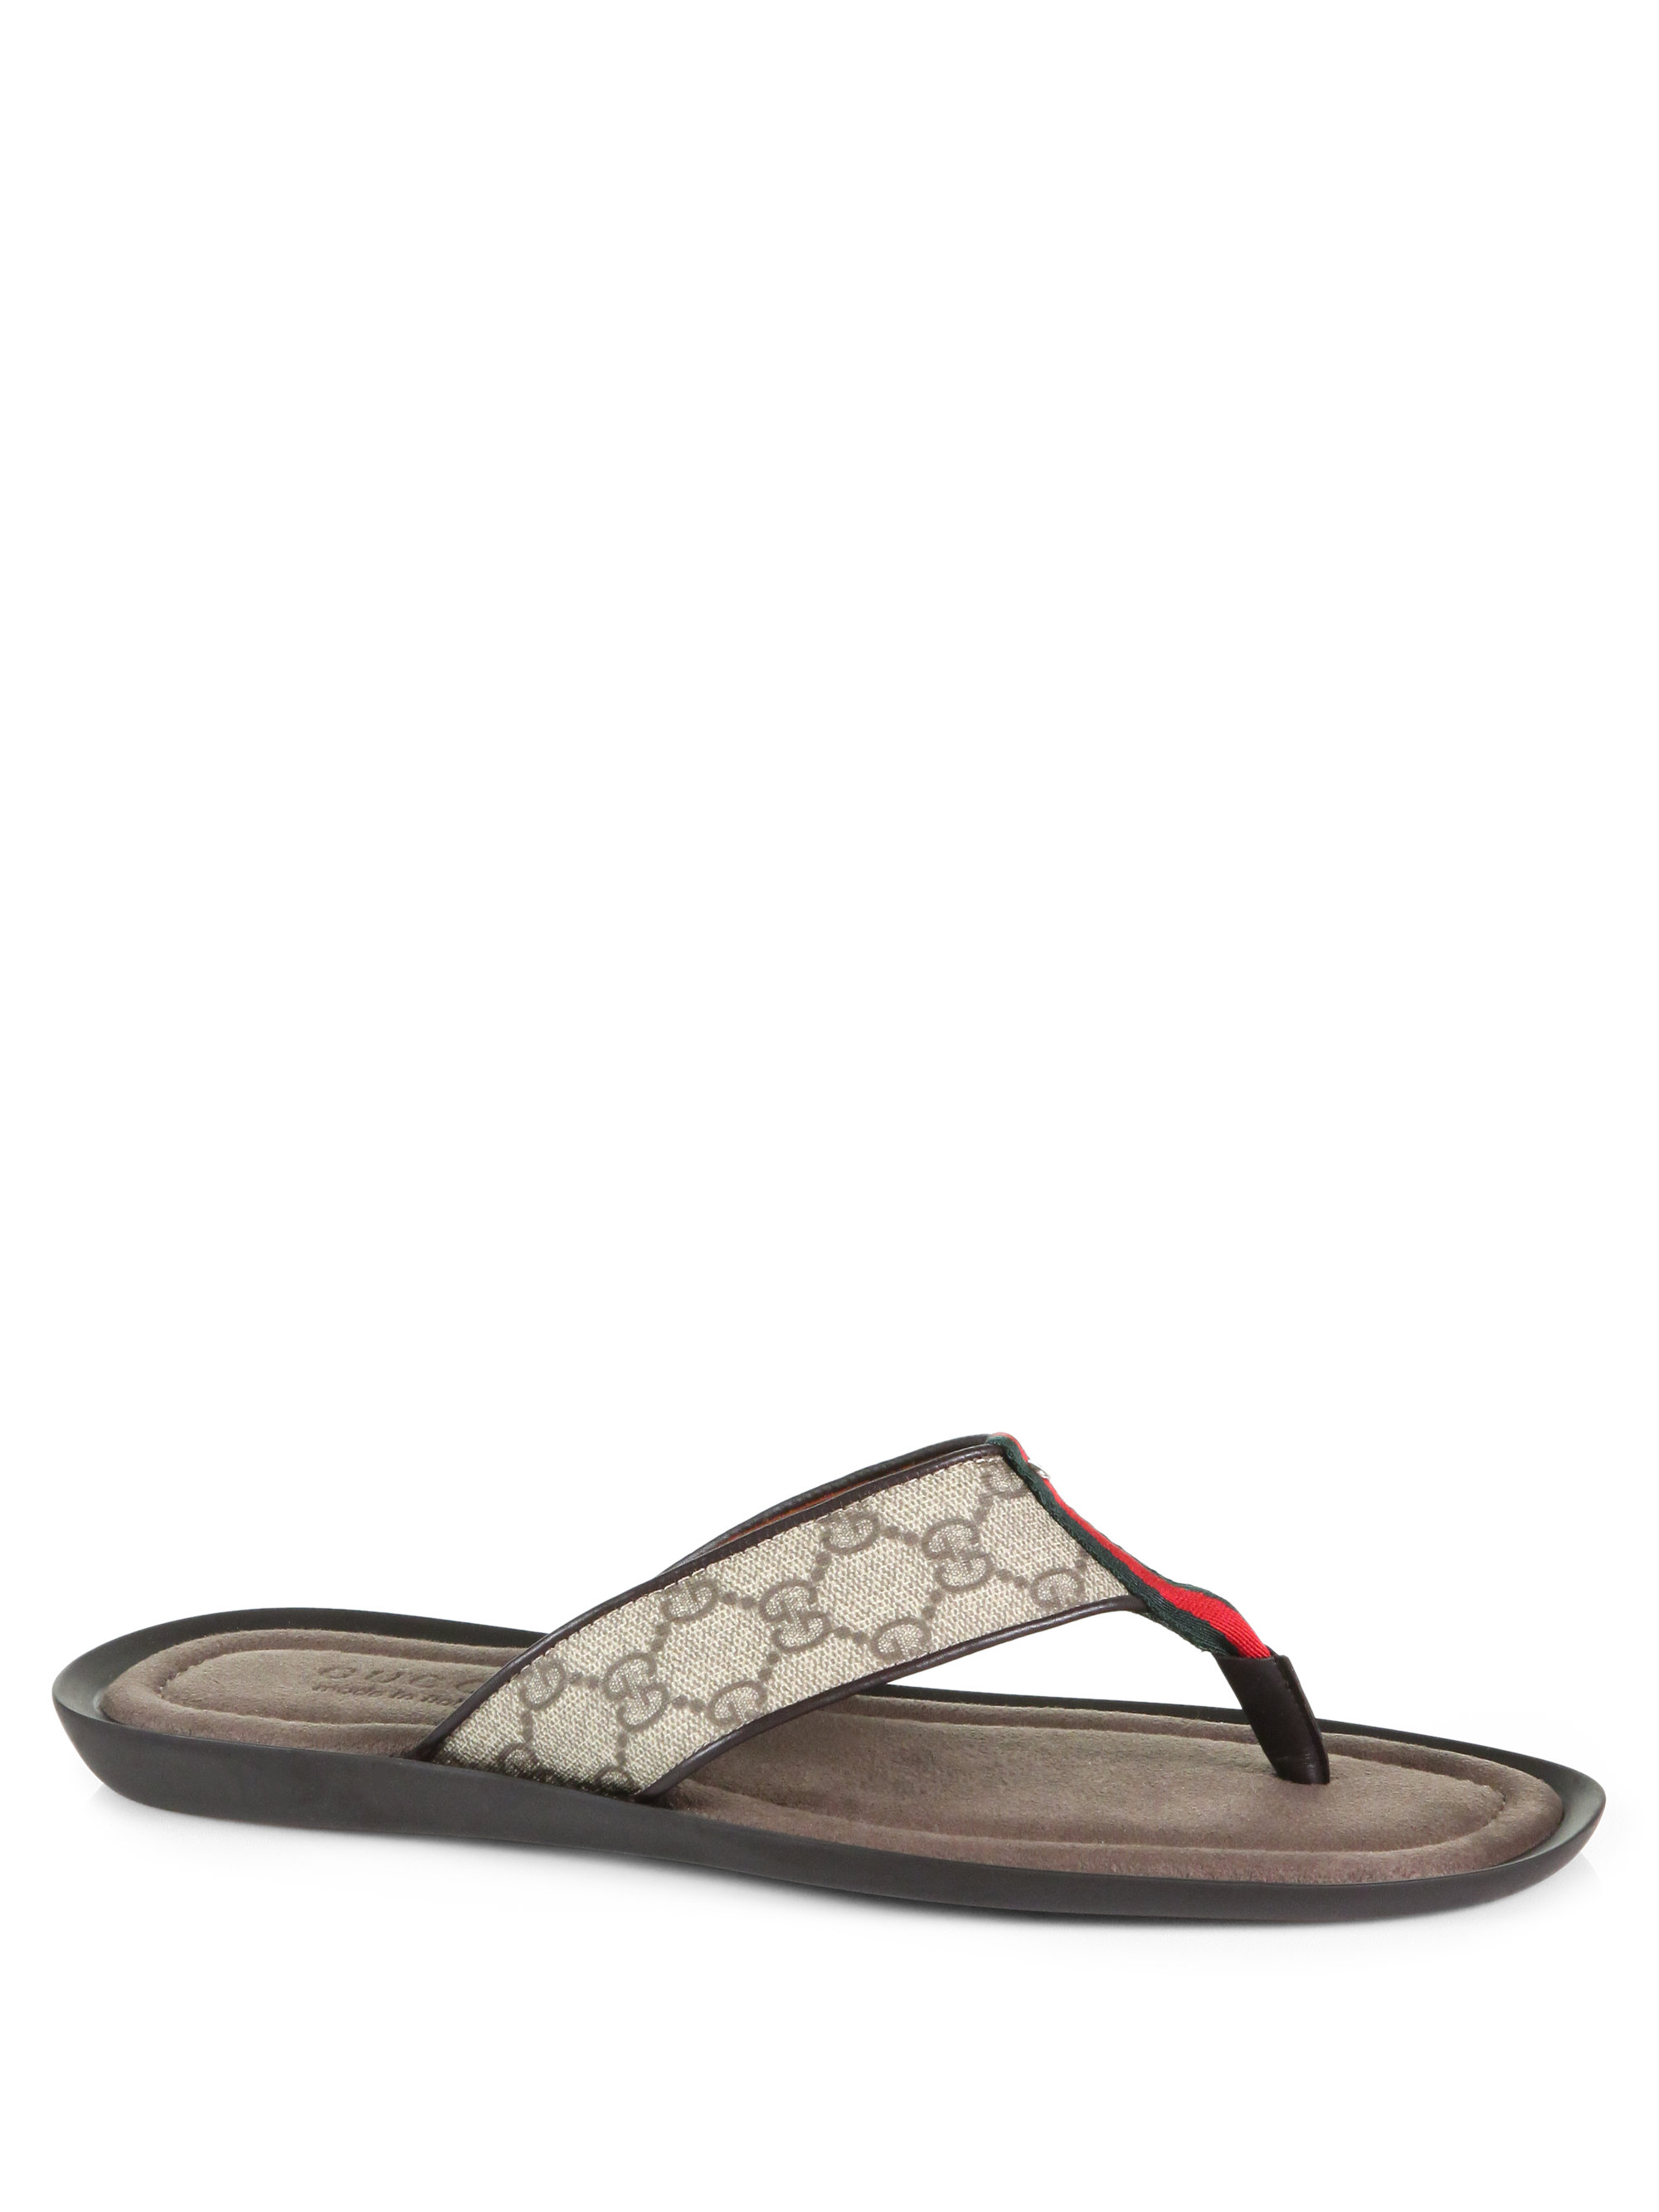 Gucci Thong Sandal in Gray - Lyst